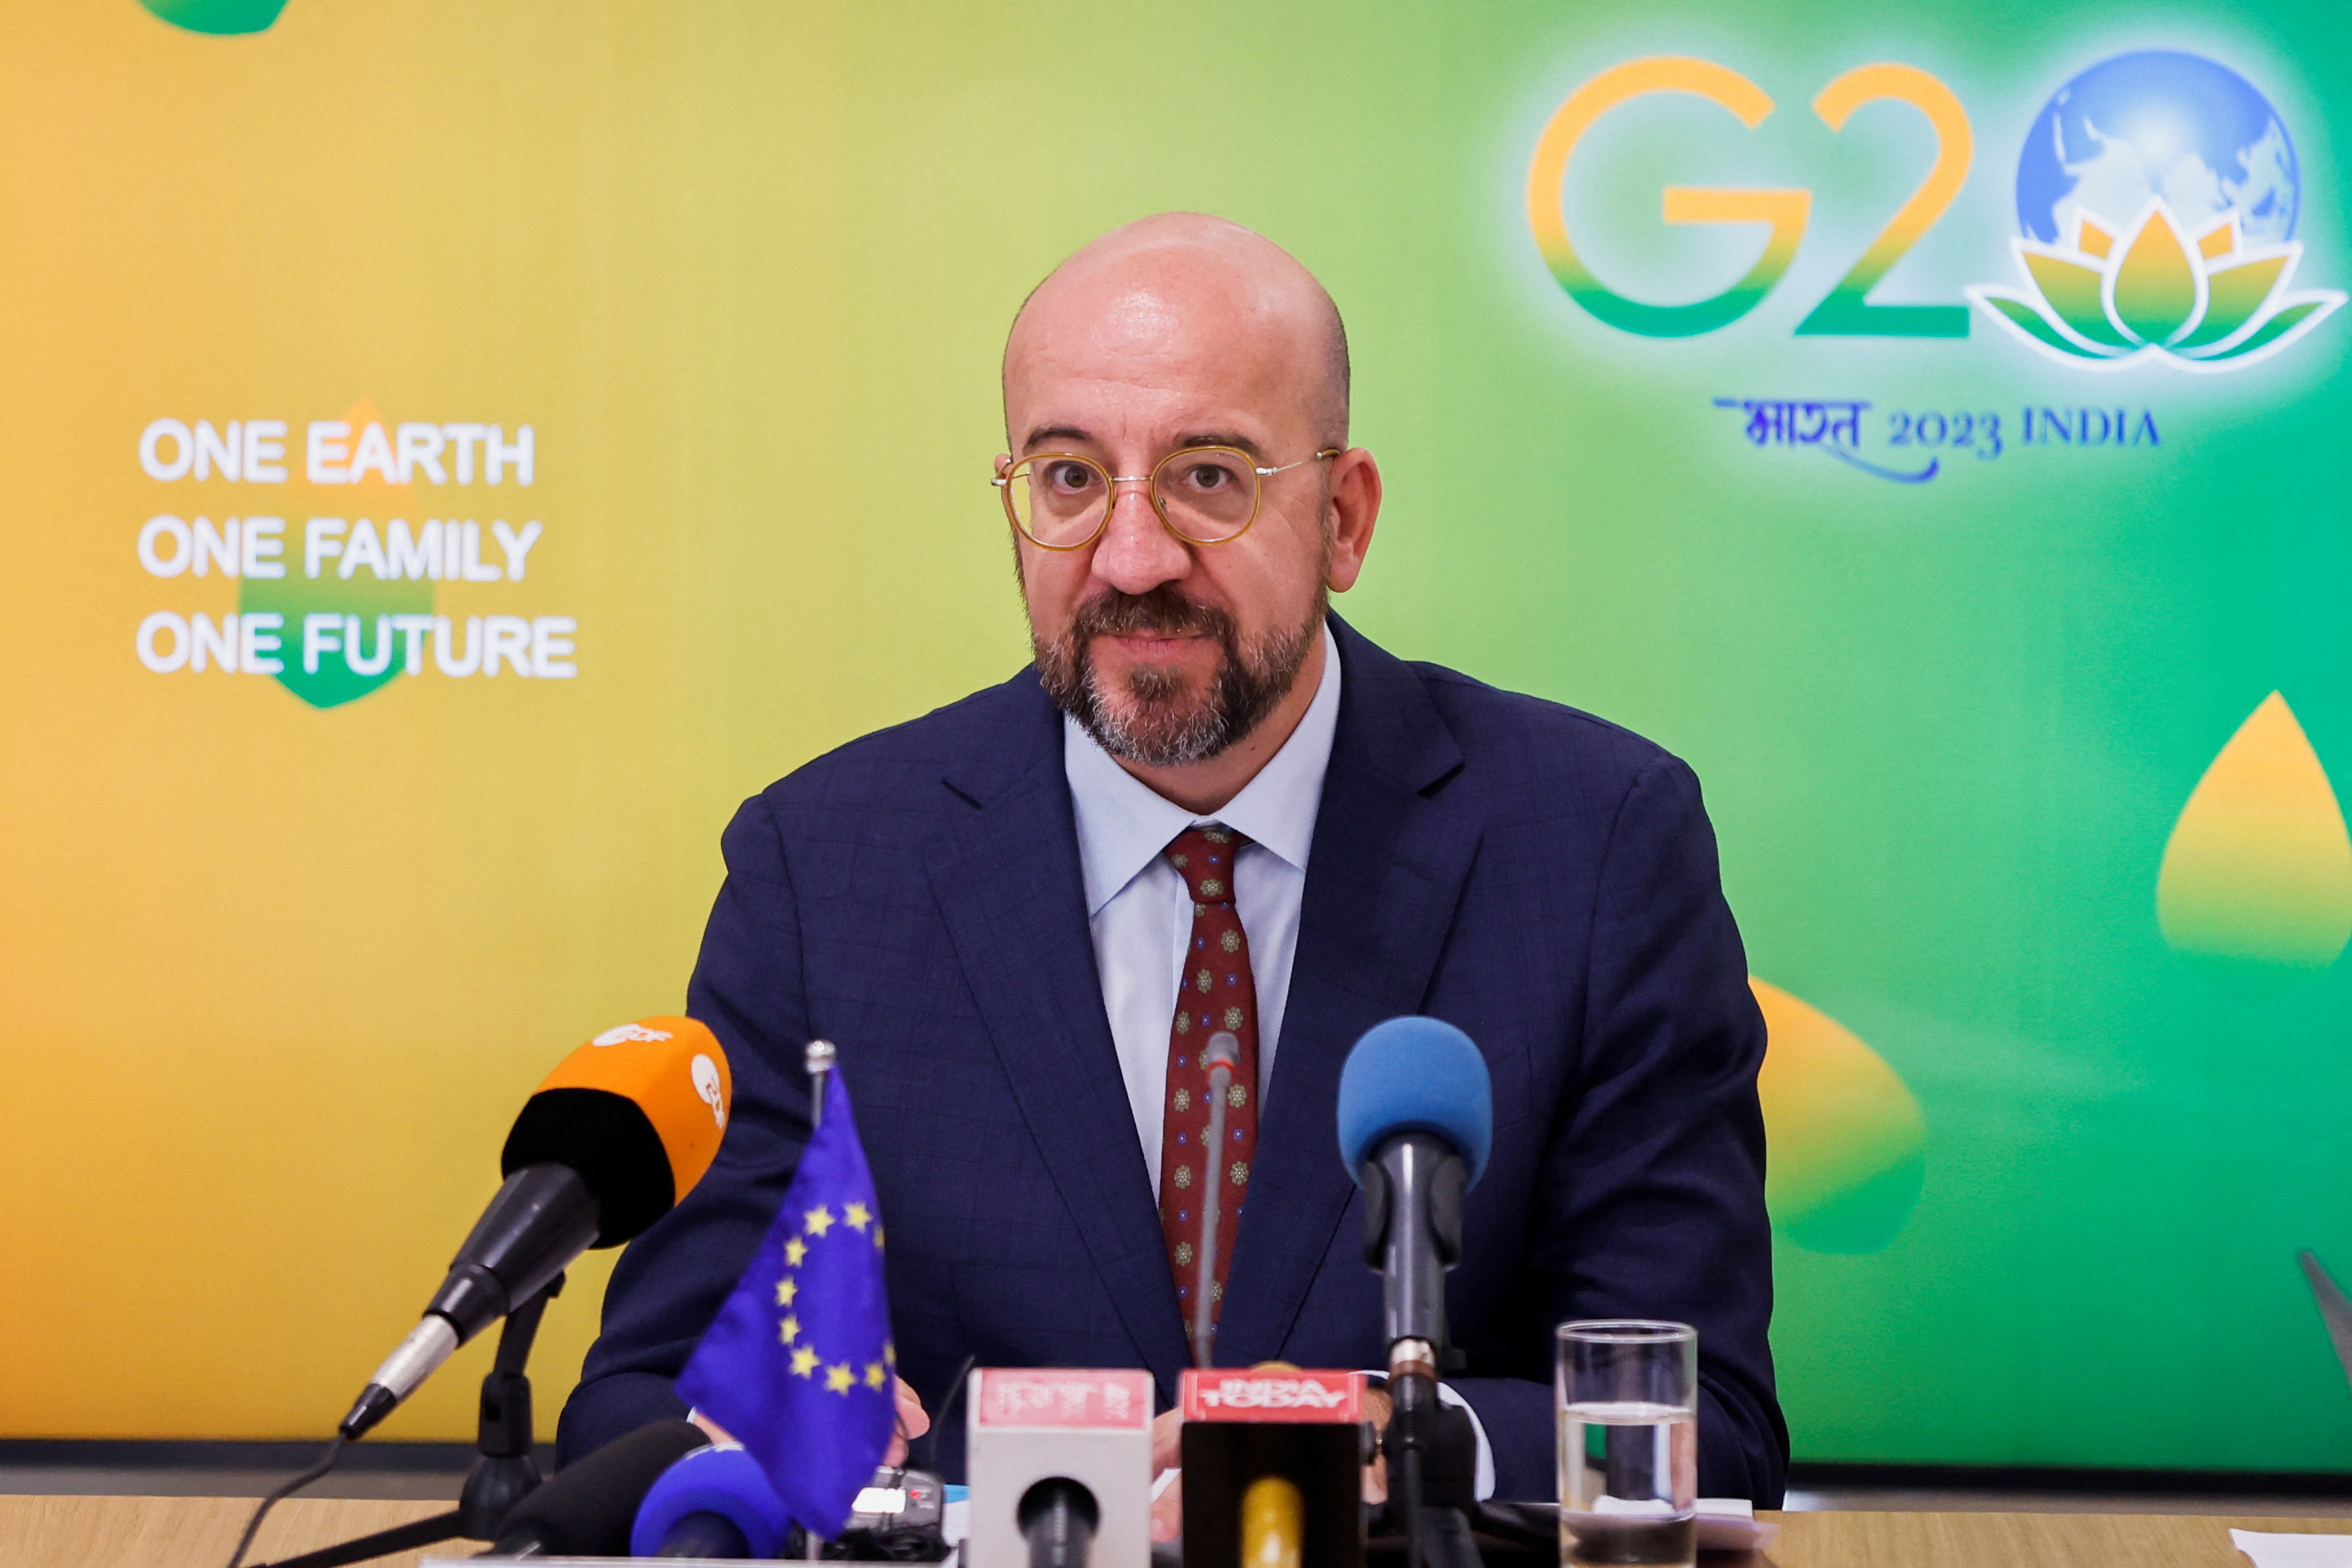 European Council President Michel attends a press briefing ahead of the G20 Summit in New Delhi